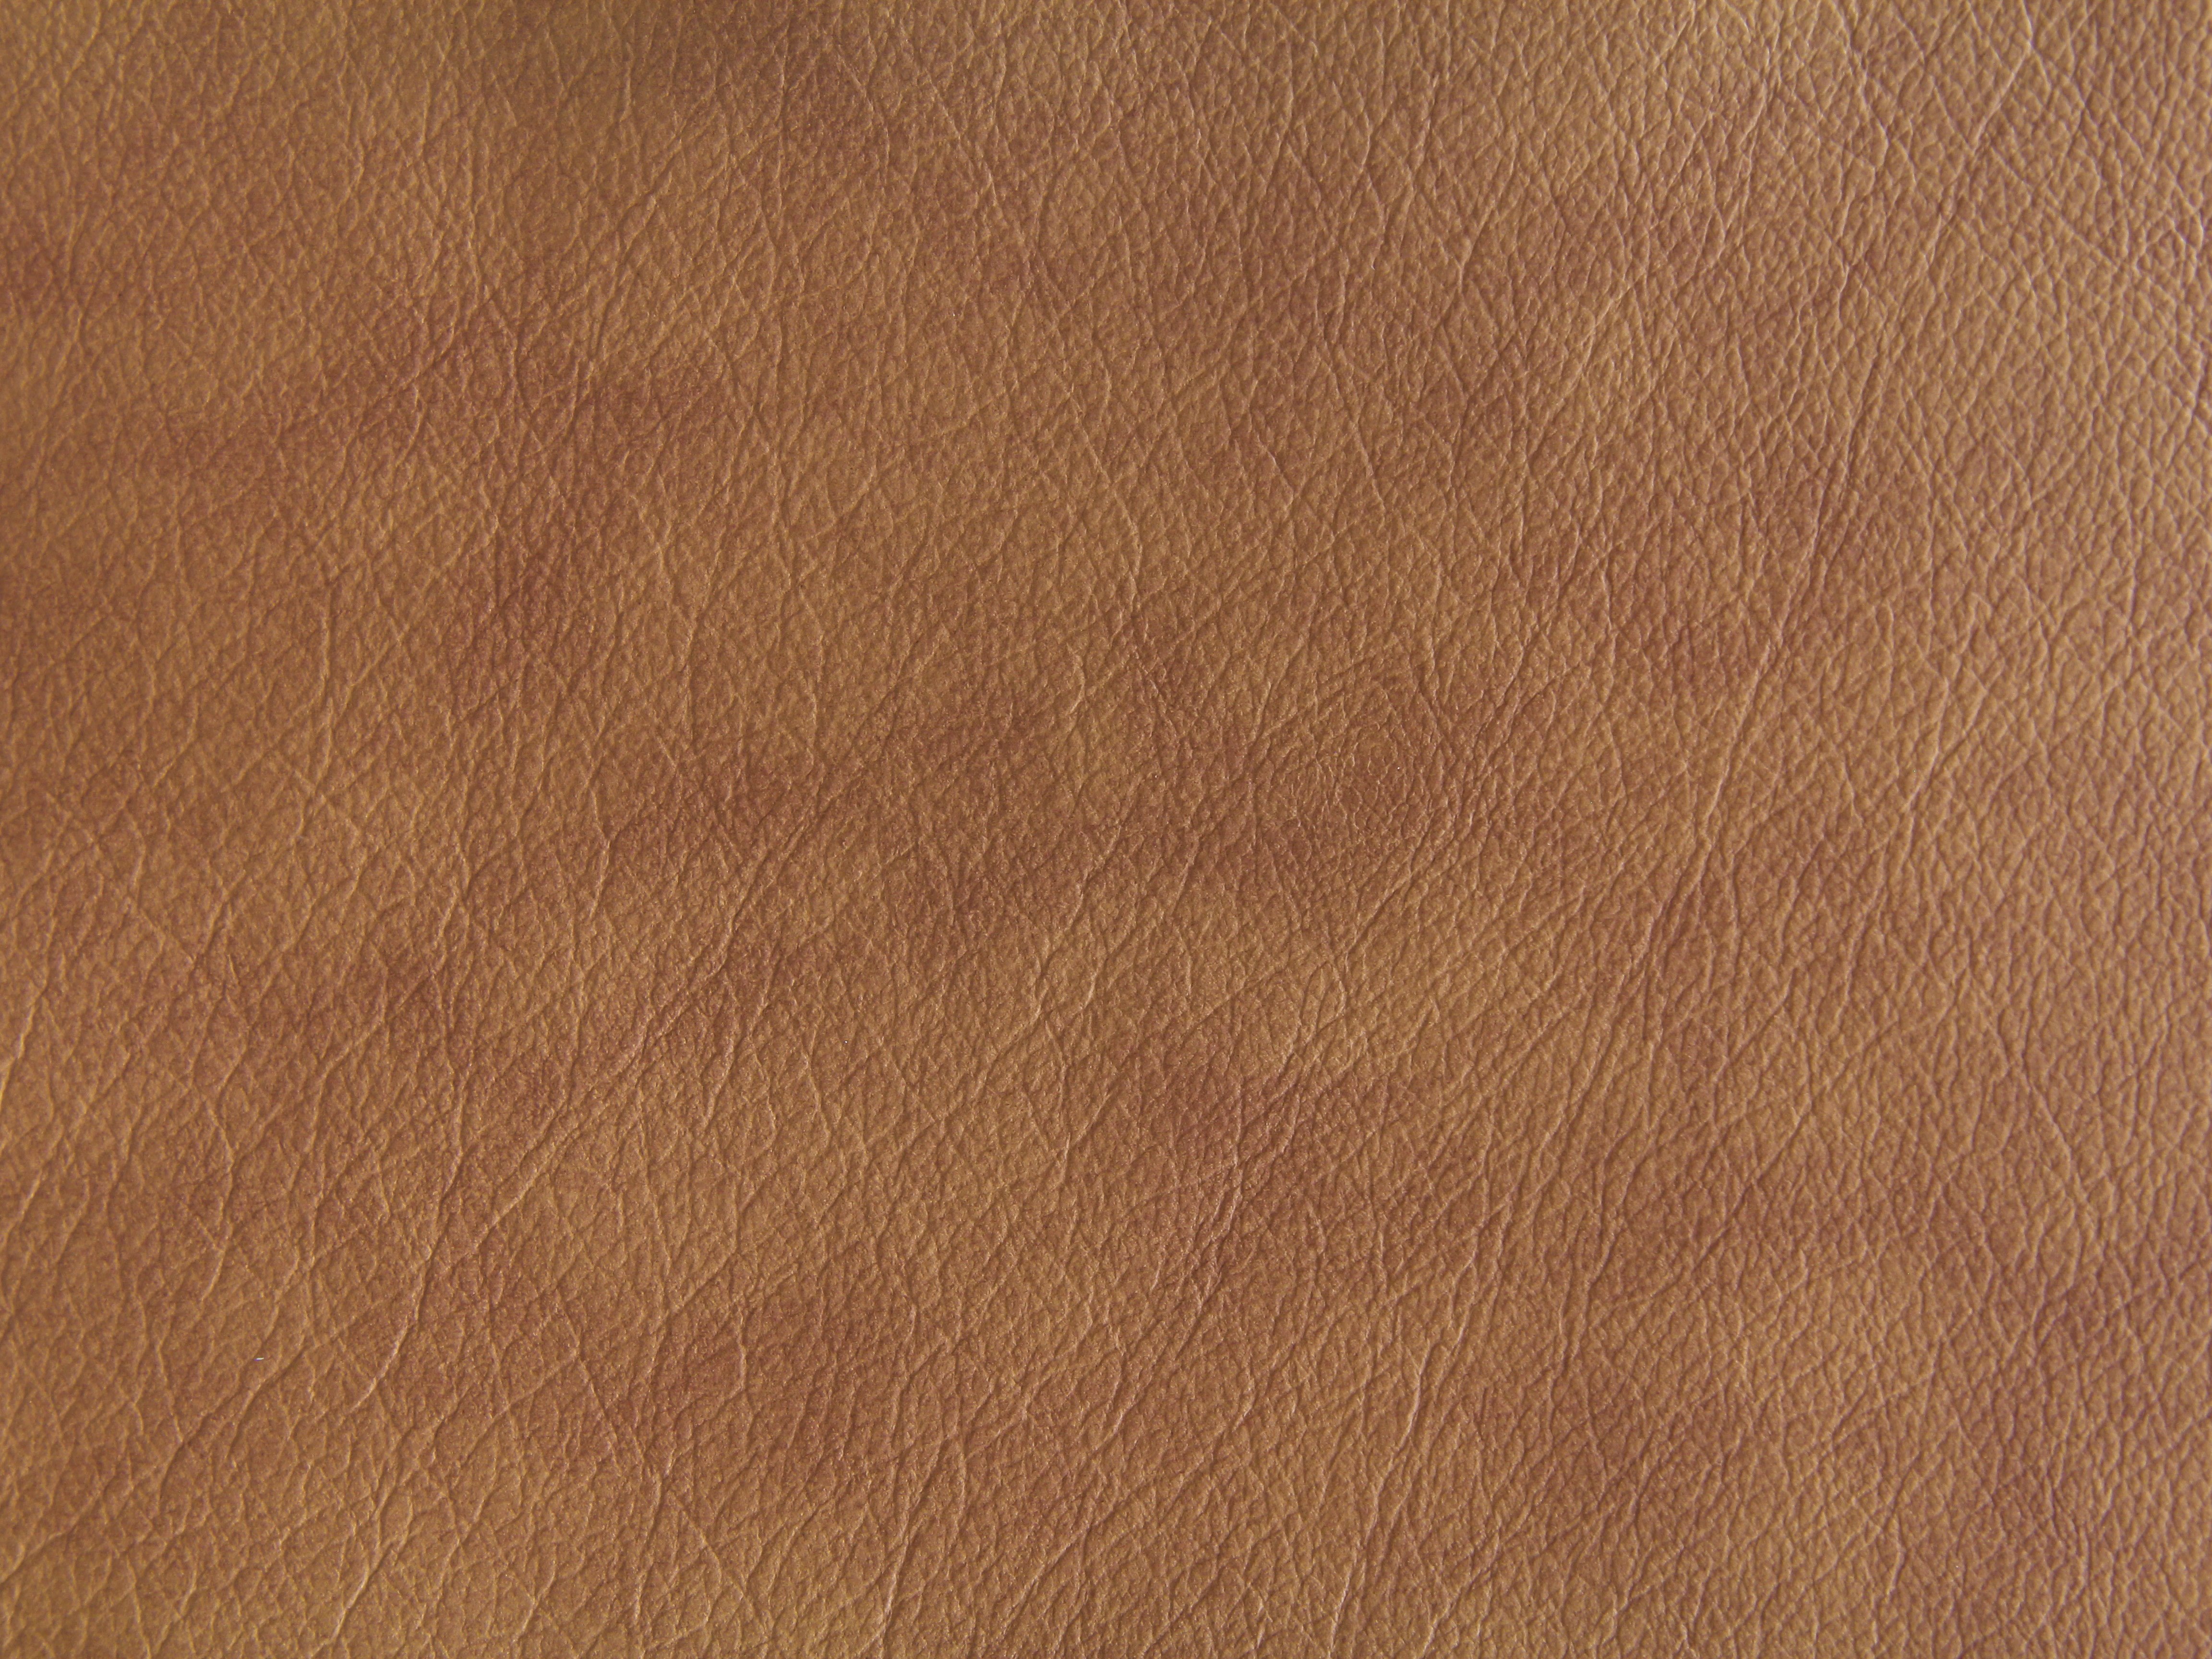 Free Leather Textures coudy brown leather texture wallpaper fabric